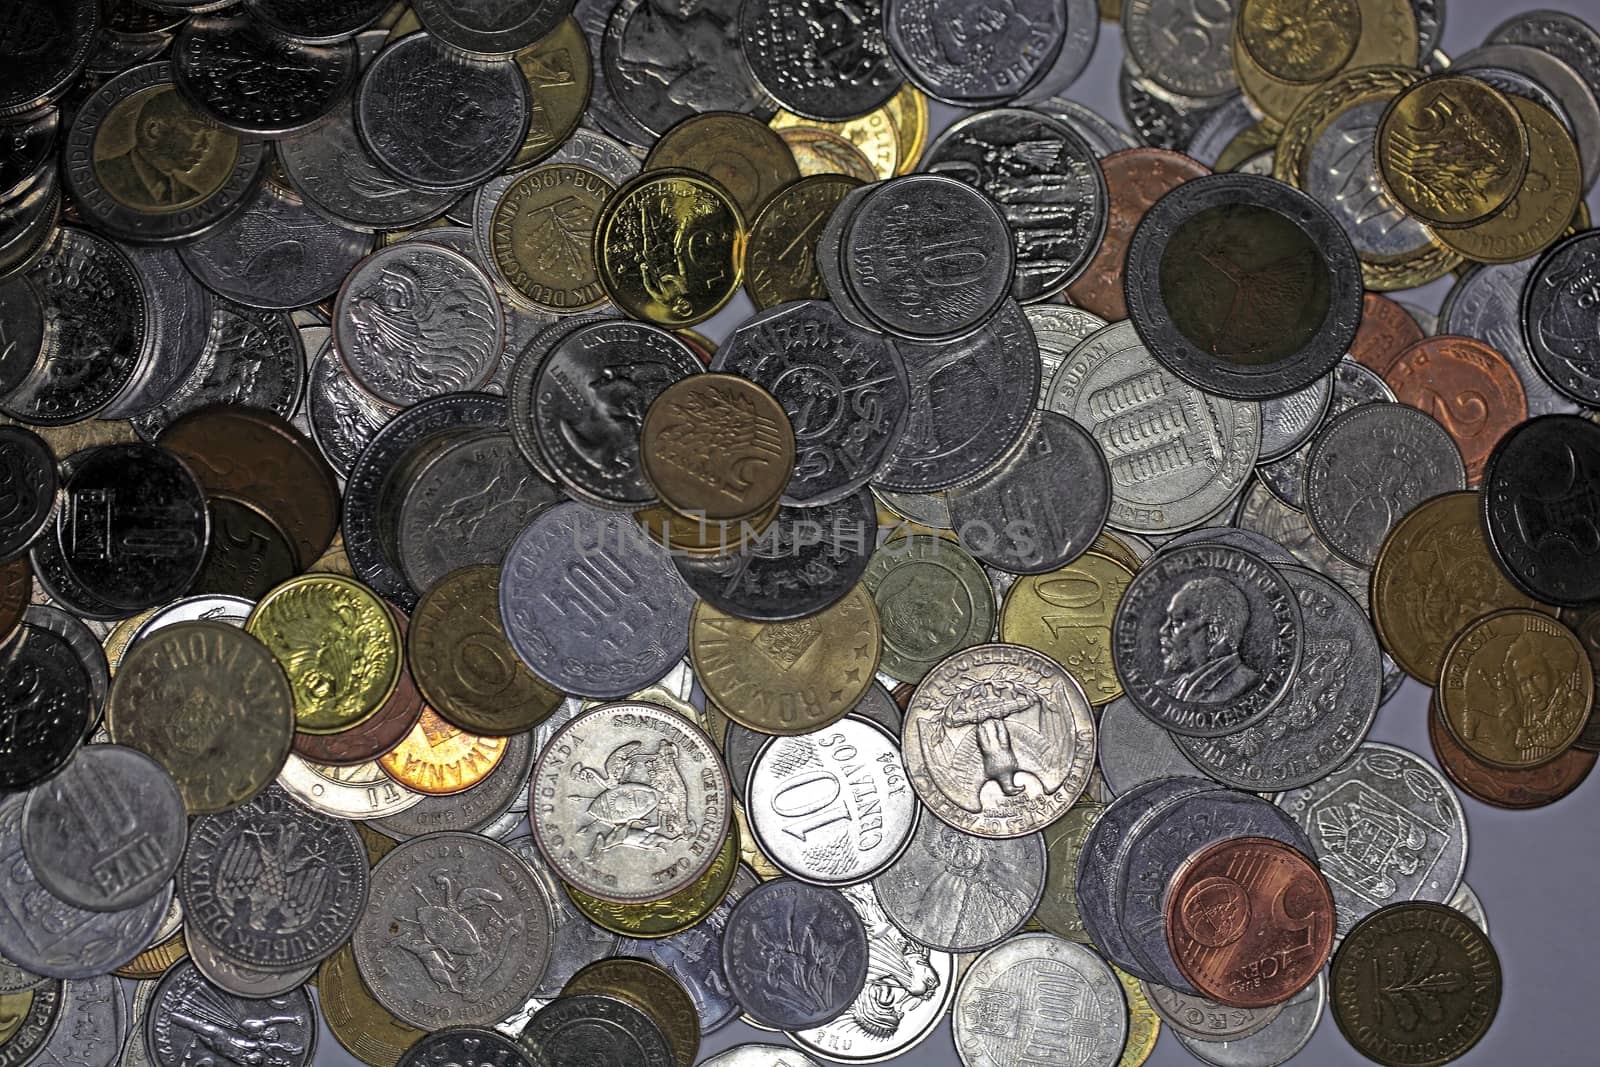 Old and international coins by CWeiss